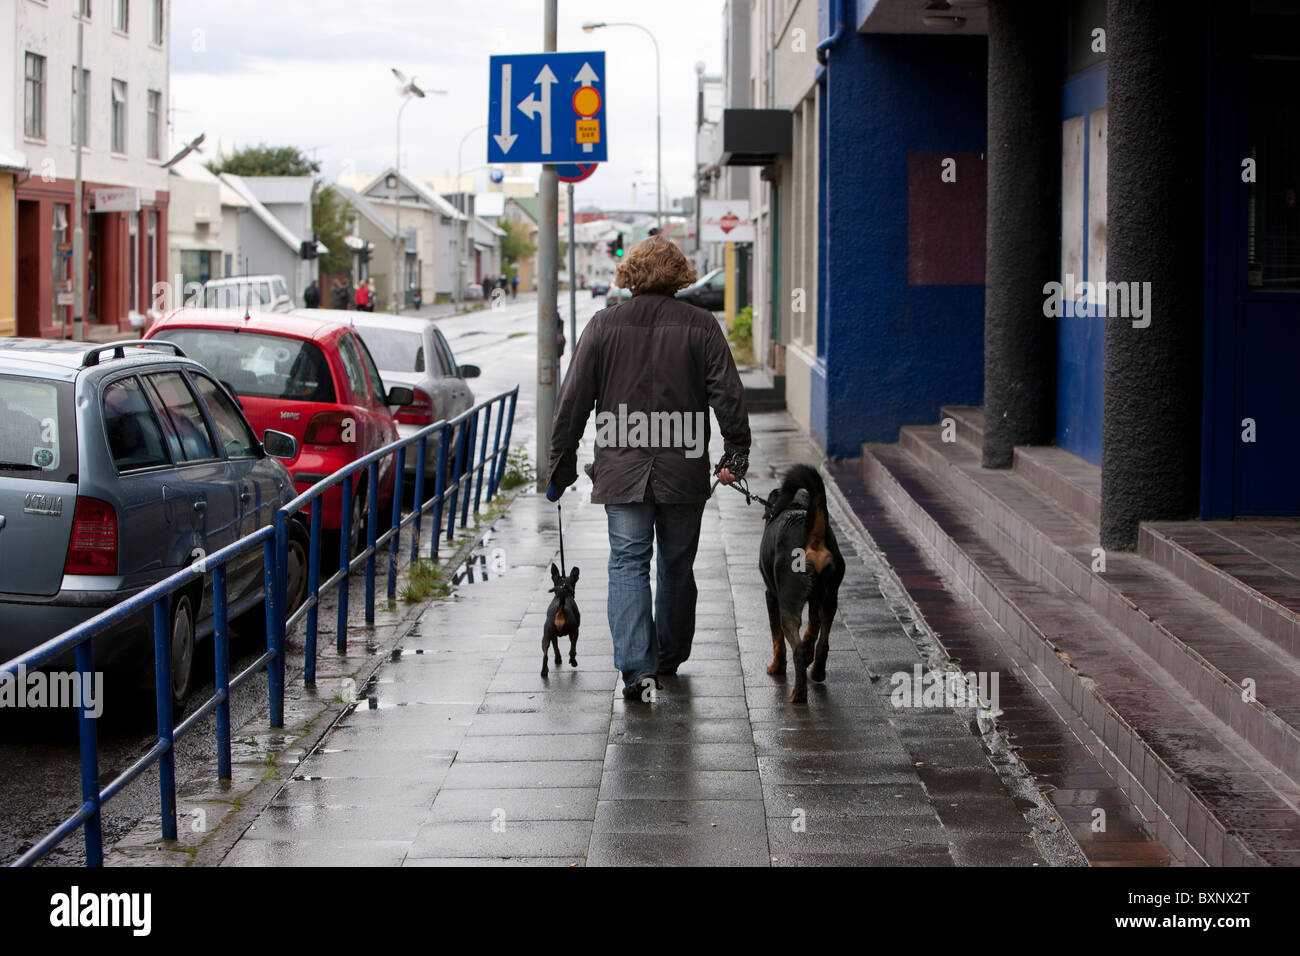 Man walking with two dogs, one large and one very small Stock Photo